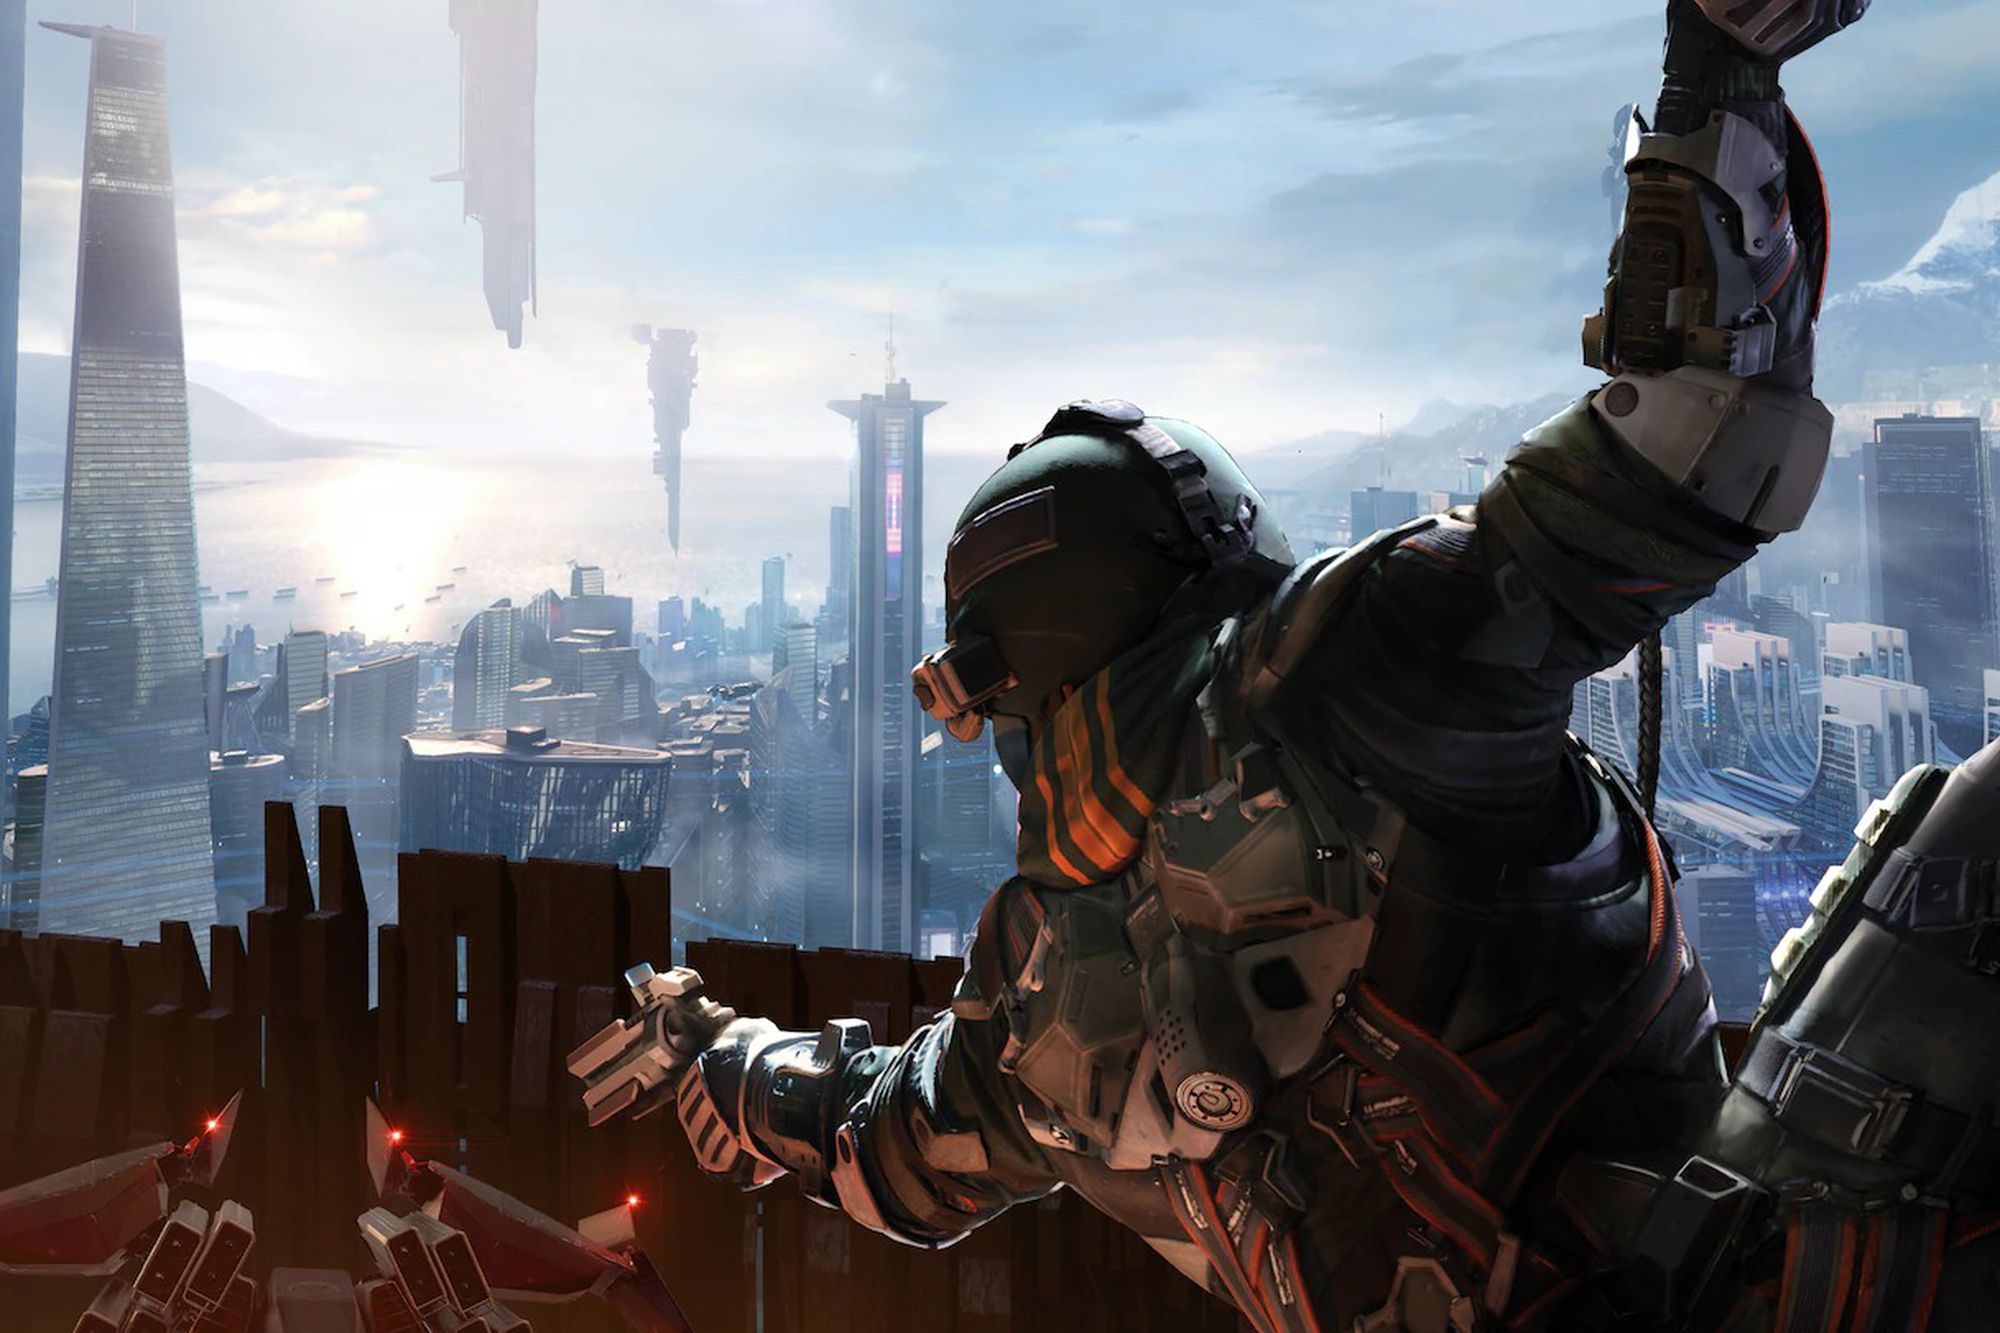 Guerrilla Games is shutting down multiplayer servers for two Killzone games